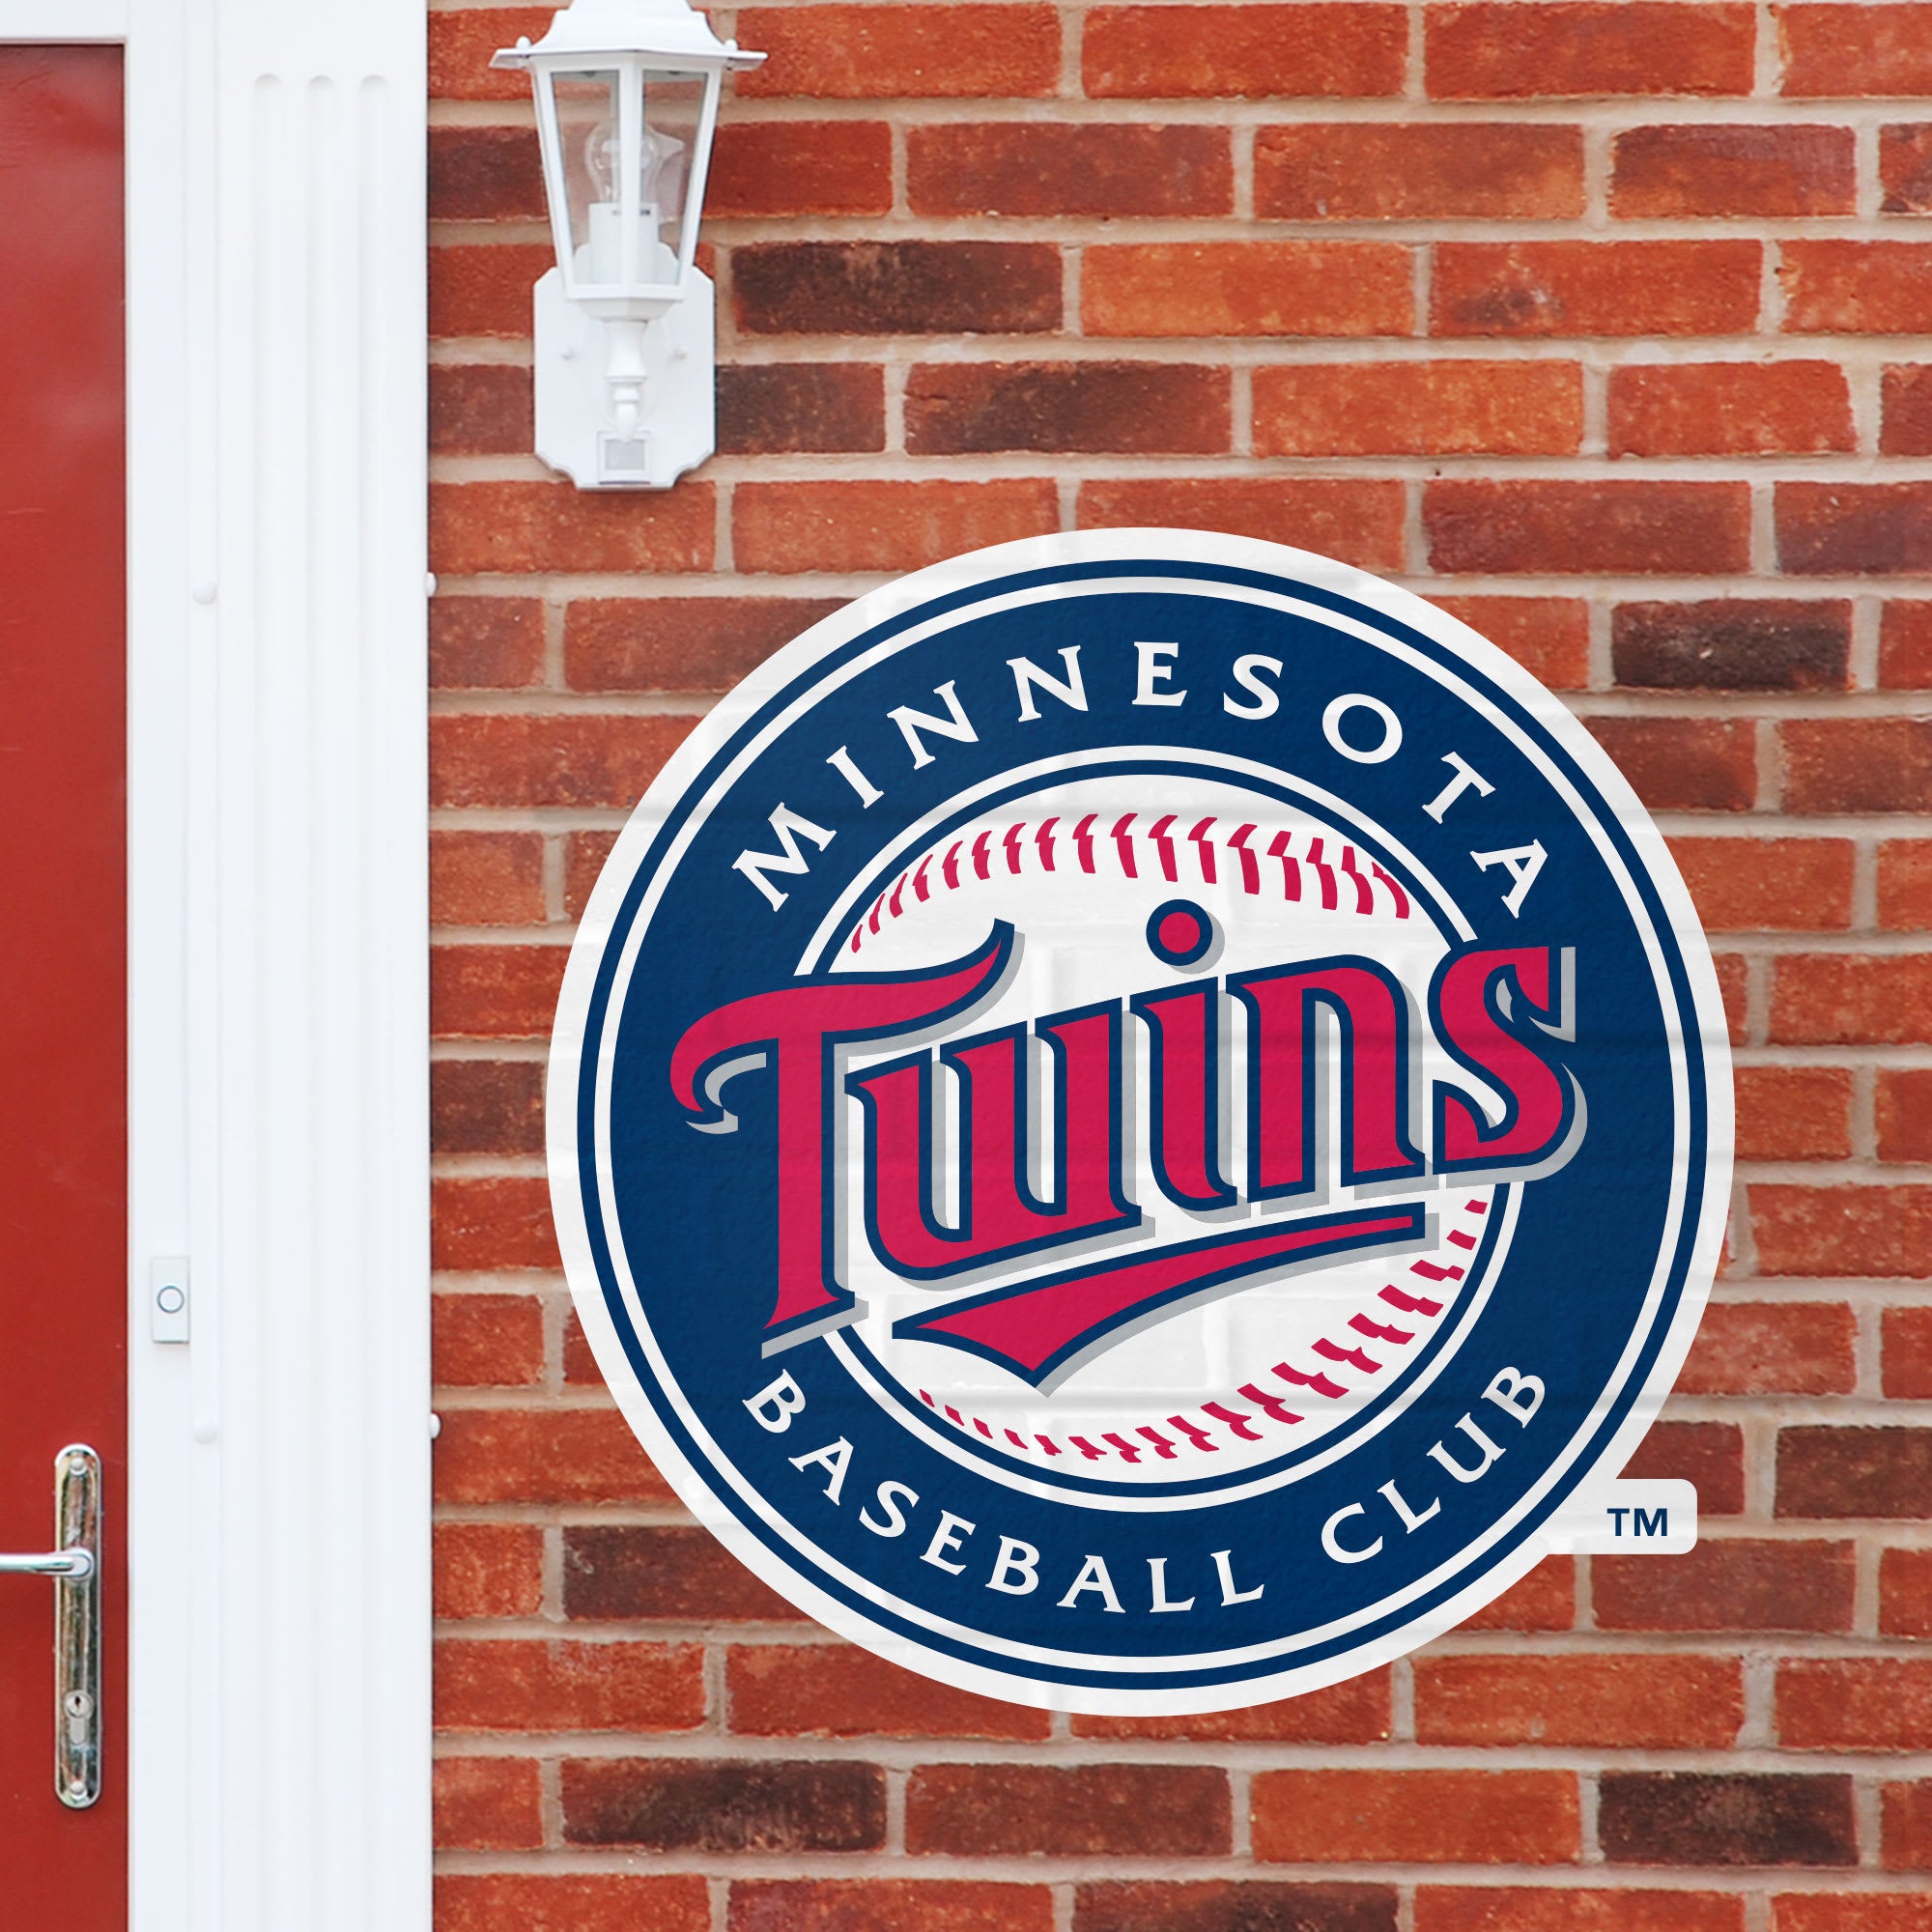 Minnesota Twins: Logo - Officially Licensed MLB Outdoor Graphic Giant Logo (30"W x 30"H) by Fathead | Wood/Aluminum